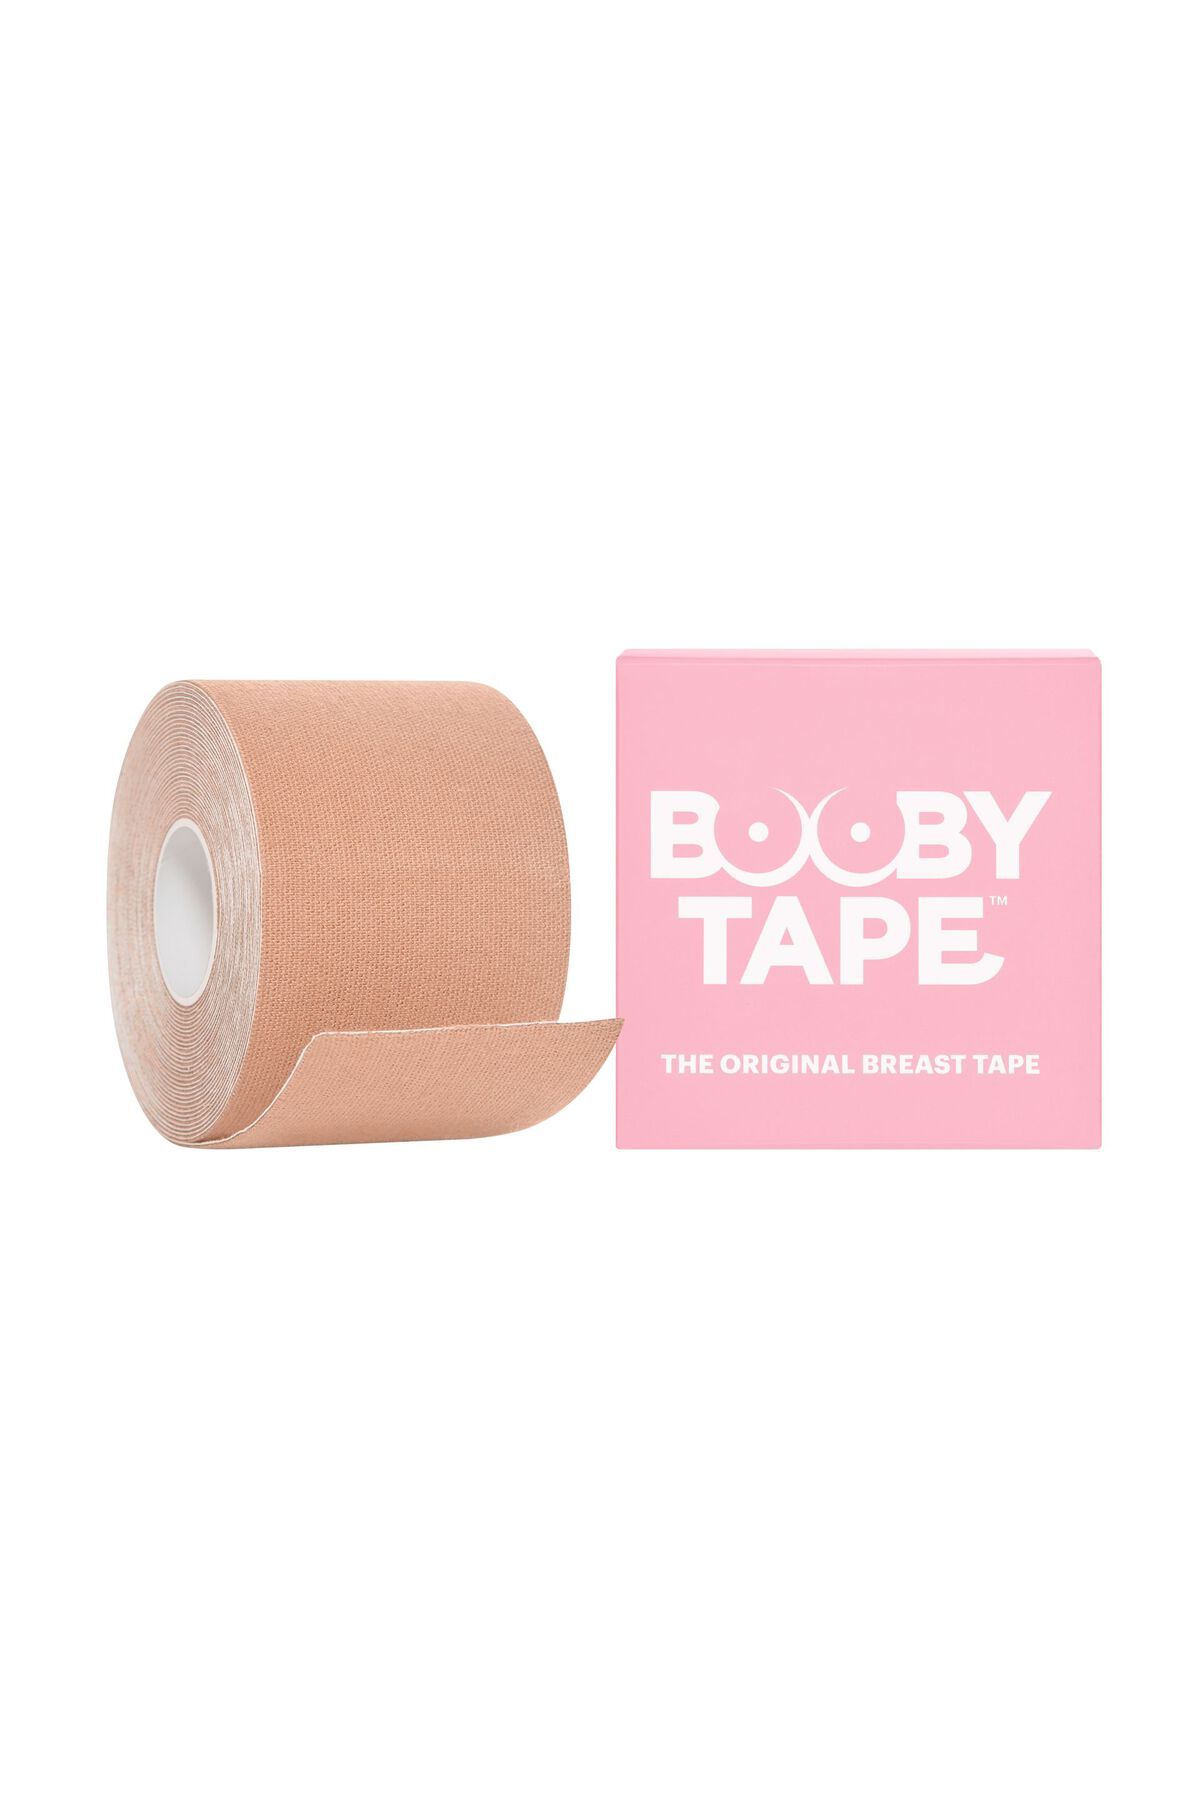 Sure Tape Boob Tape Breast Tape Kit for A-C Cup – Albatross Health